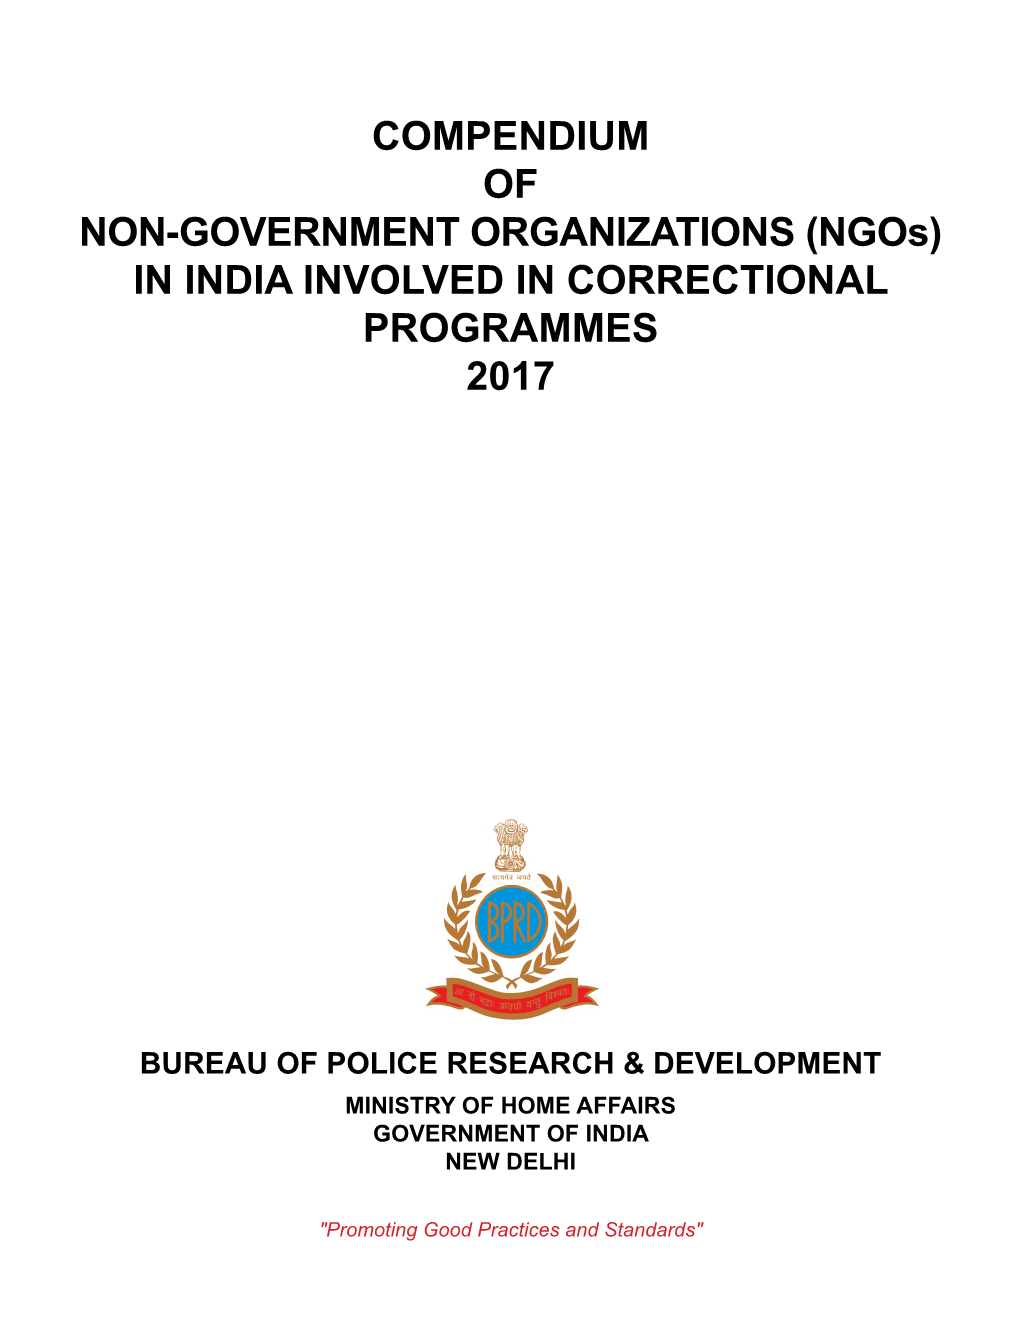 Compendium of Ngos Involved in Prison and Correctional Programmes